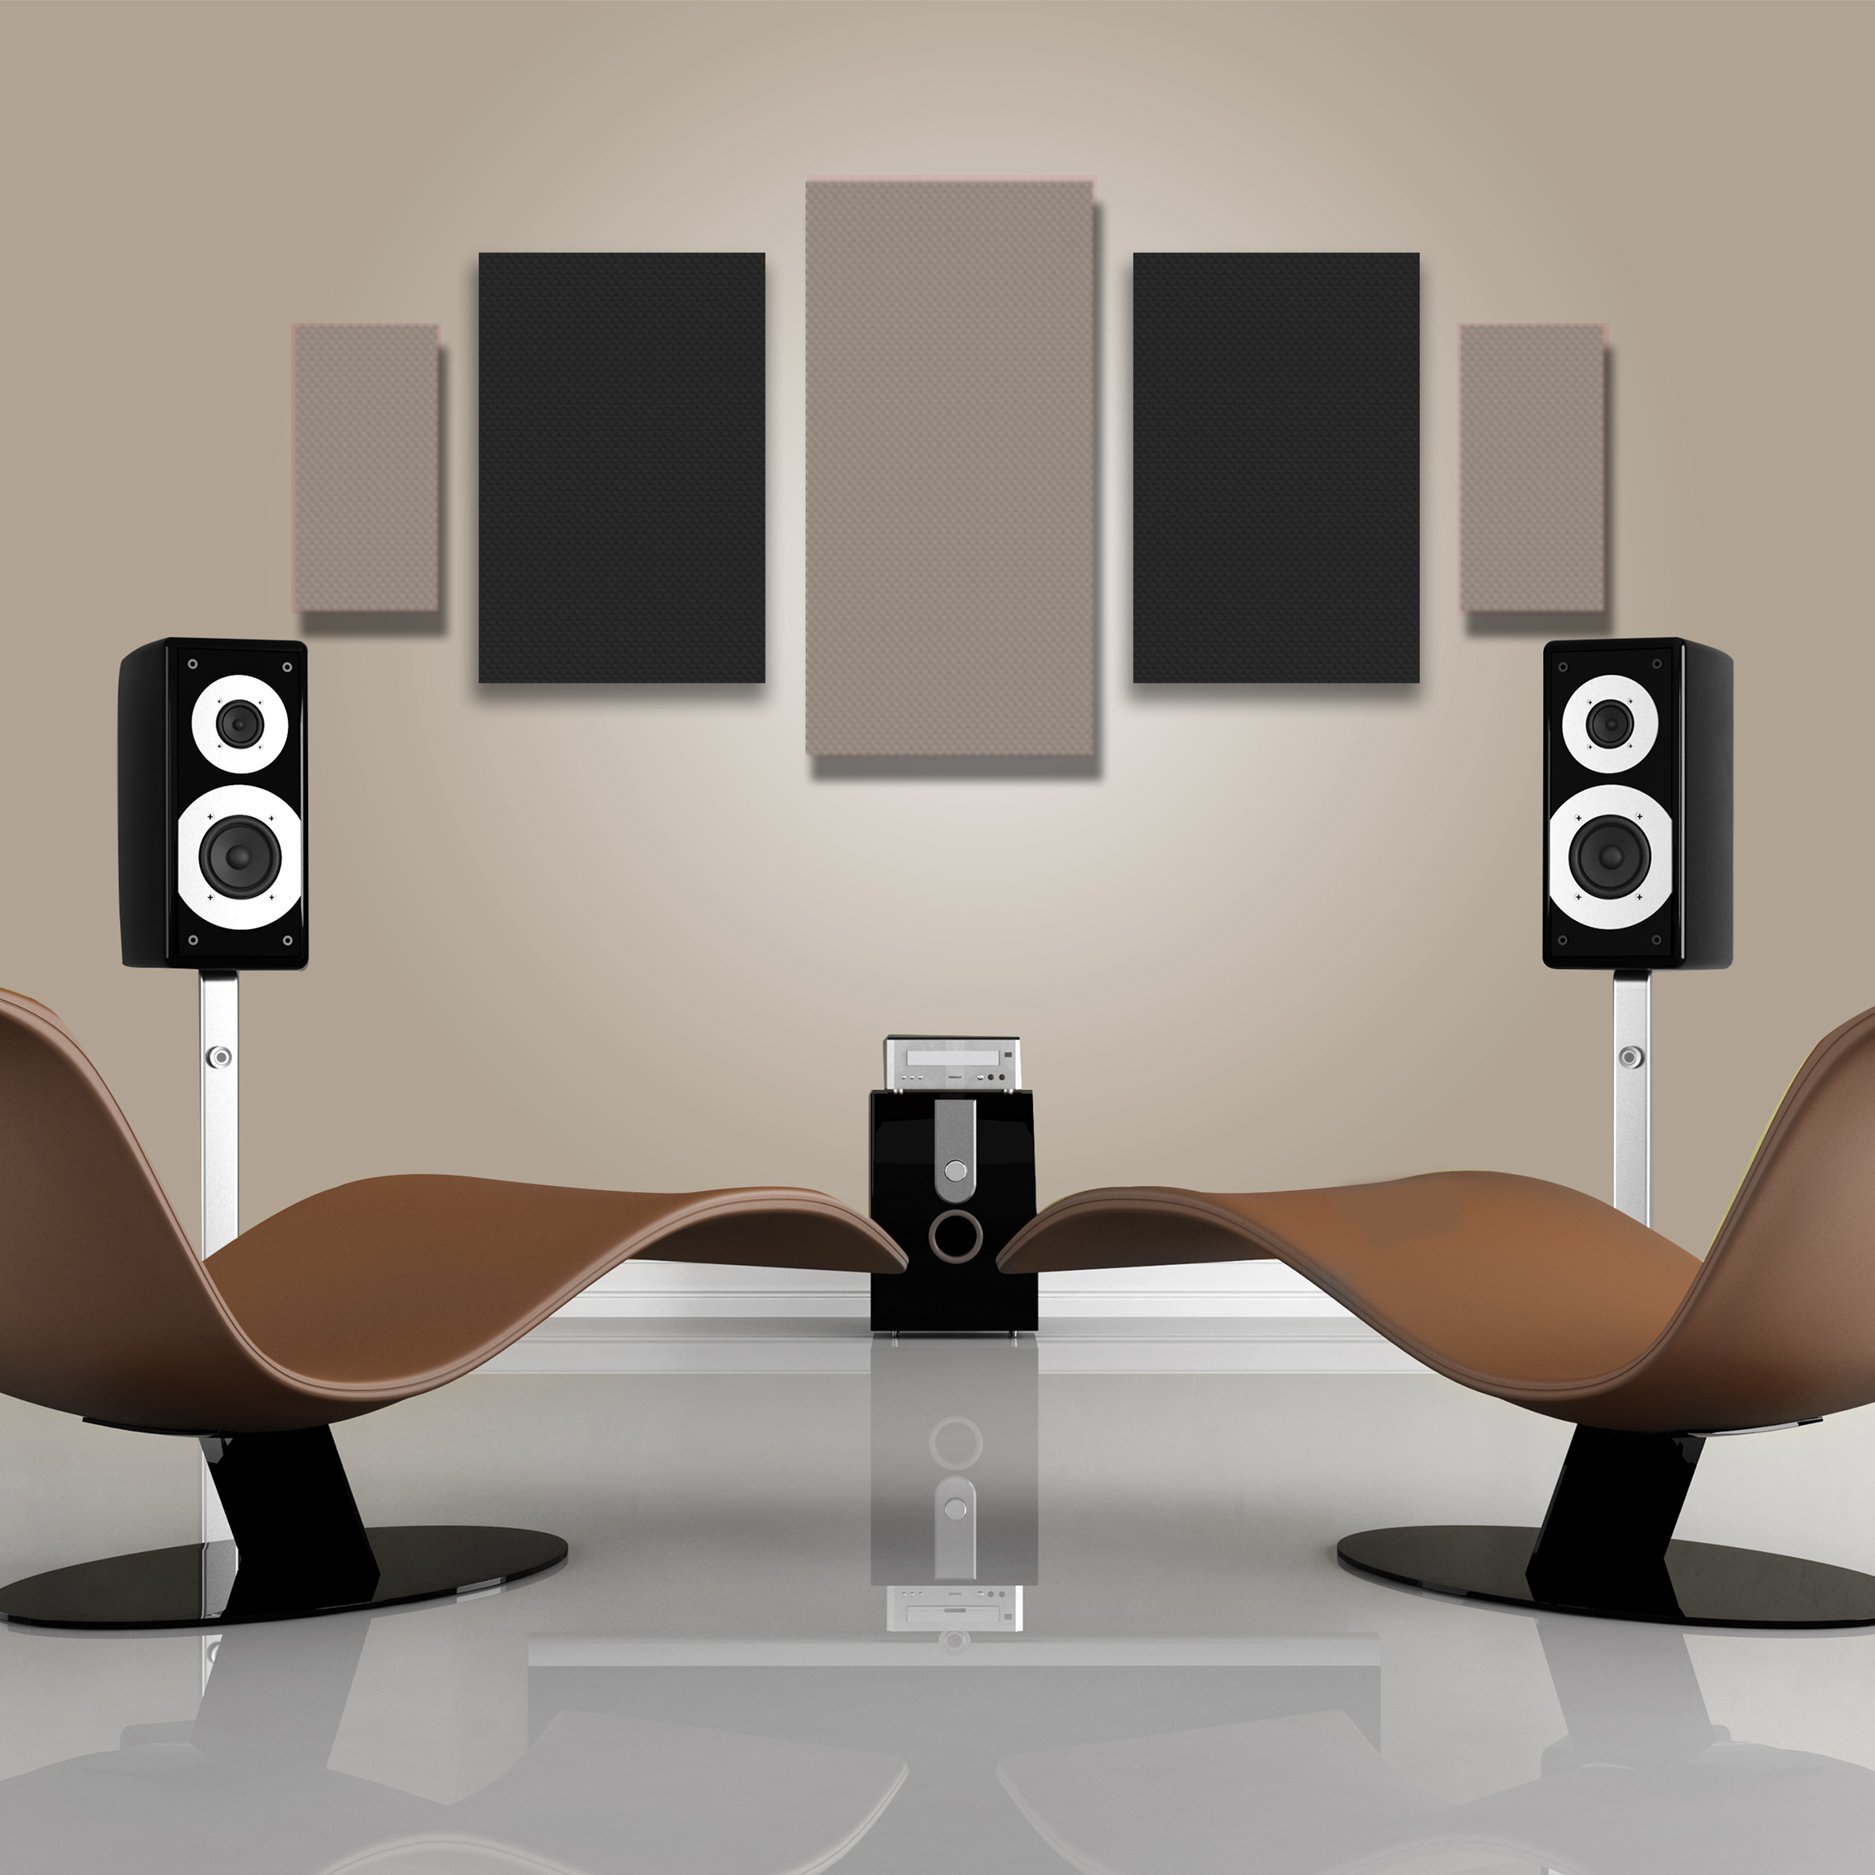 Improving room acoustics with MEISTER acoustic panels